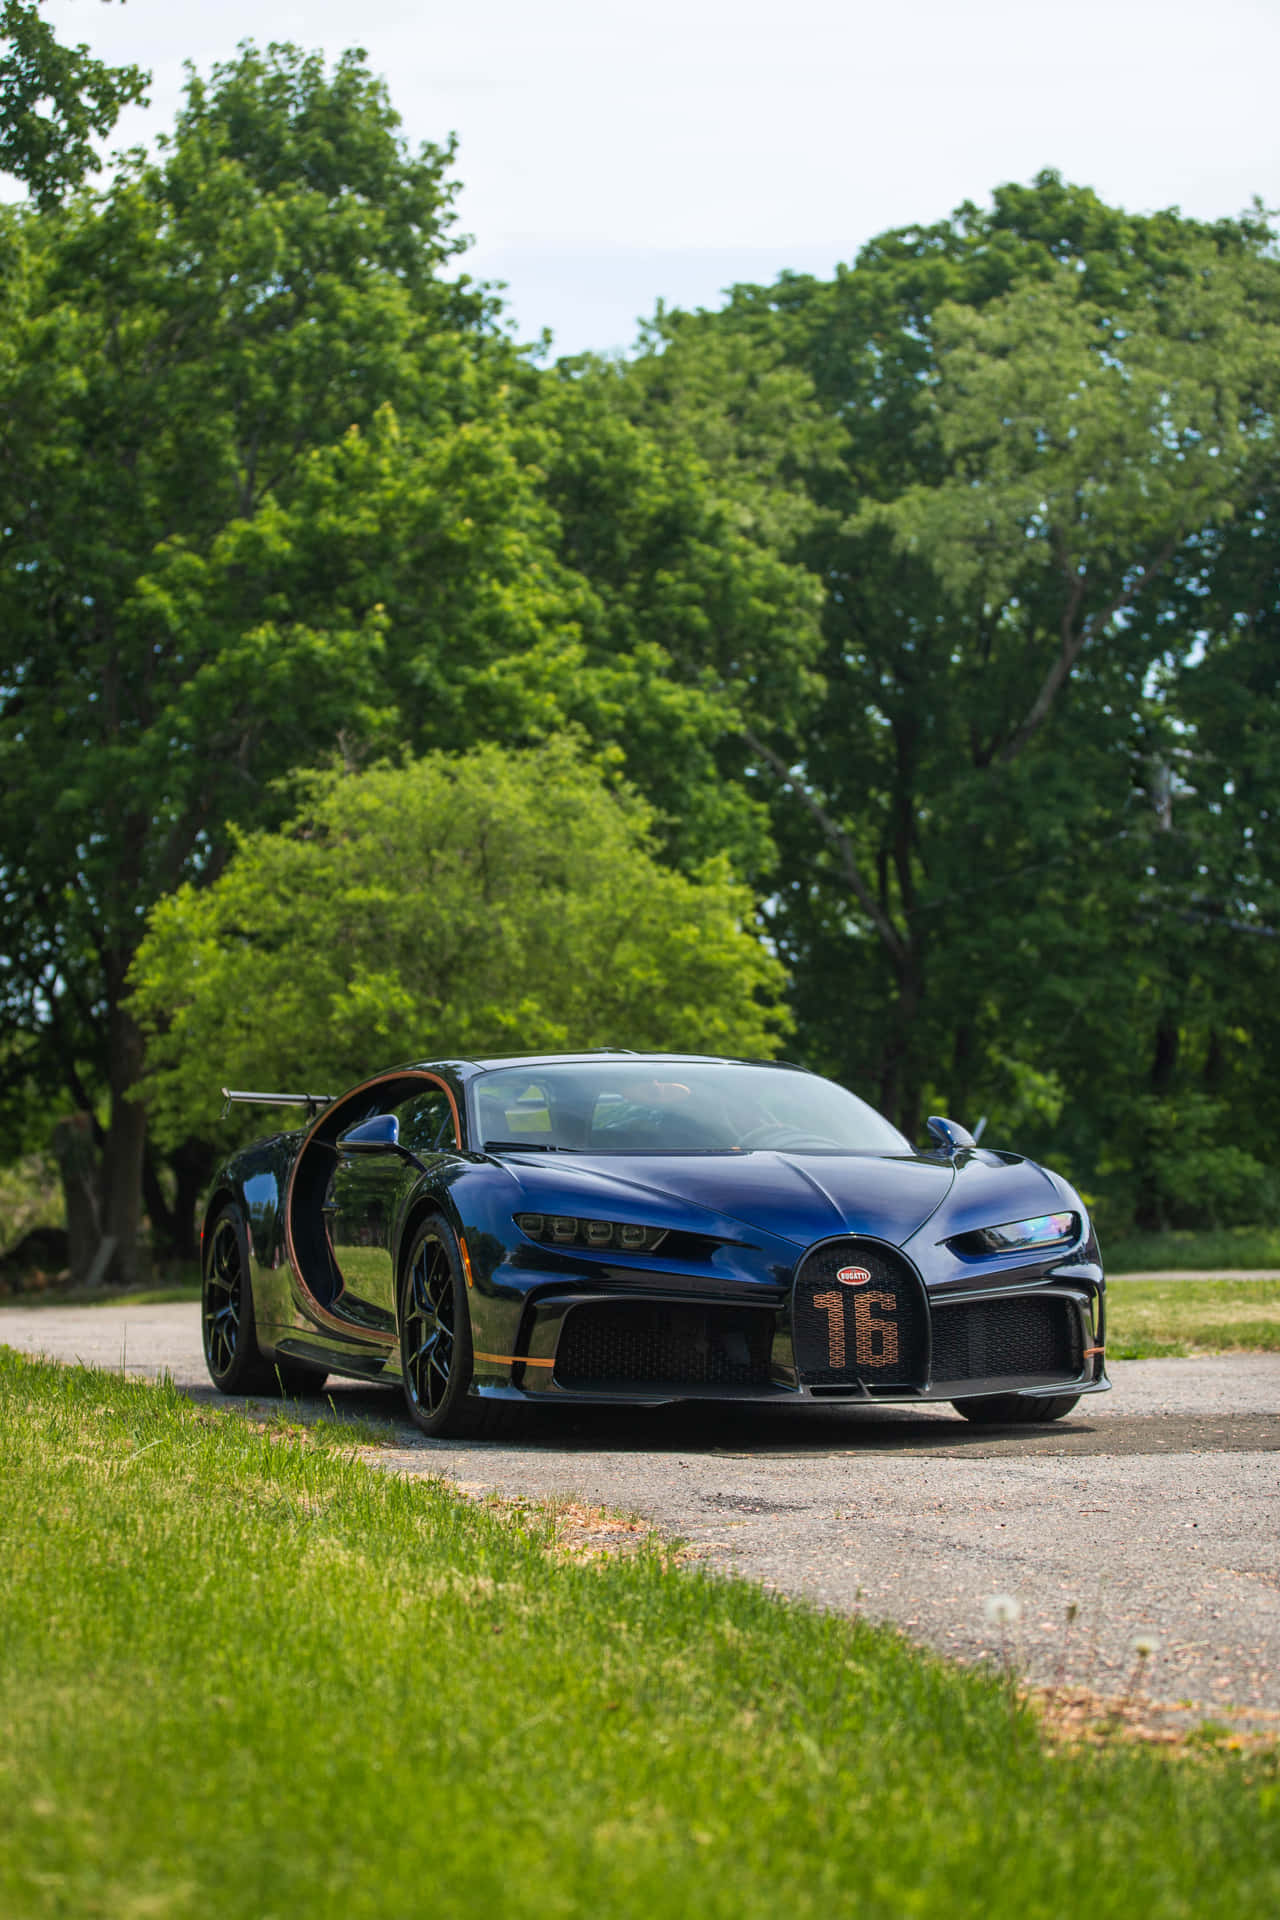 Capturing Moment with the Bugatti Phone Wallpaper